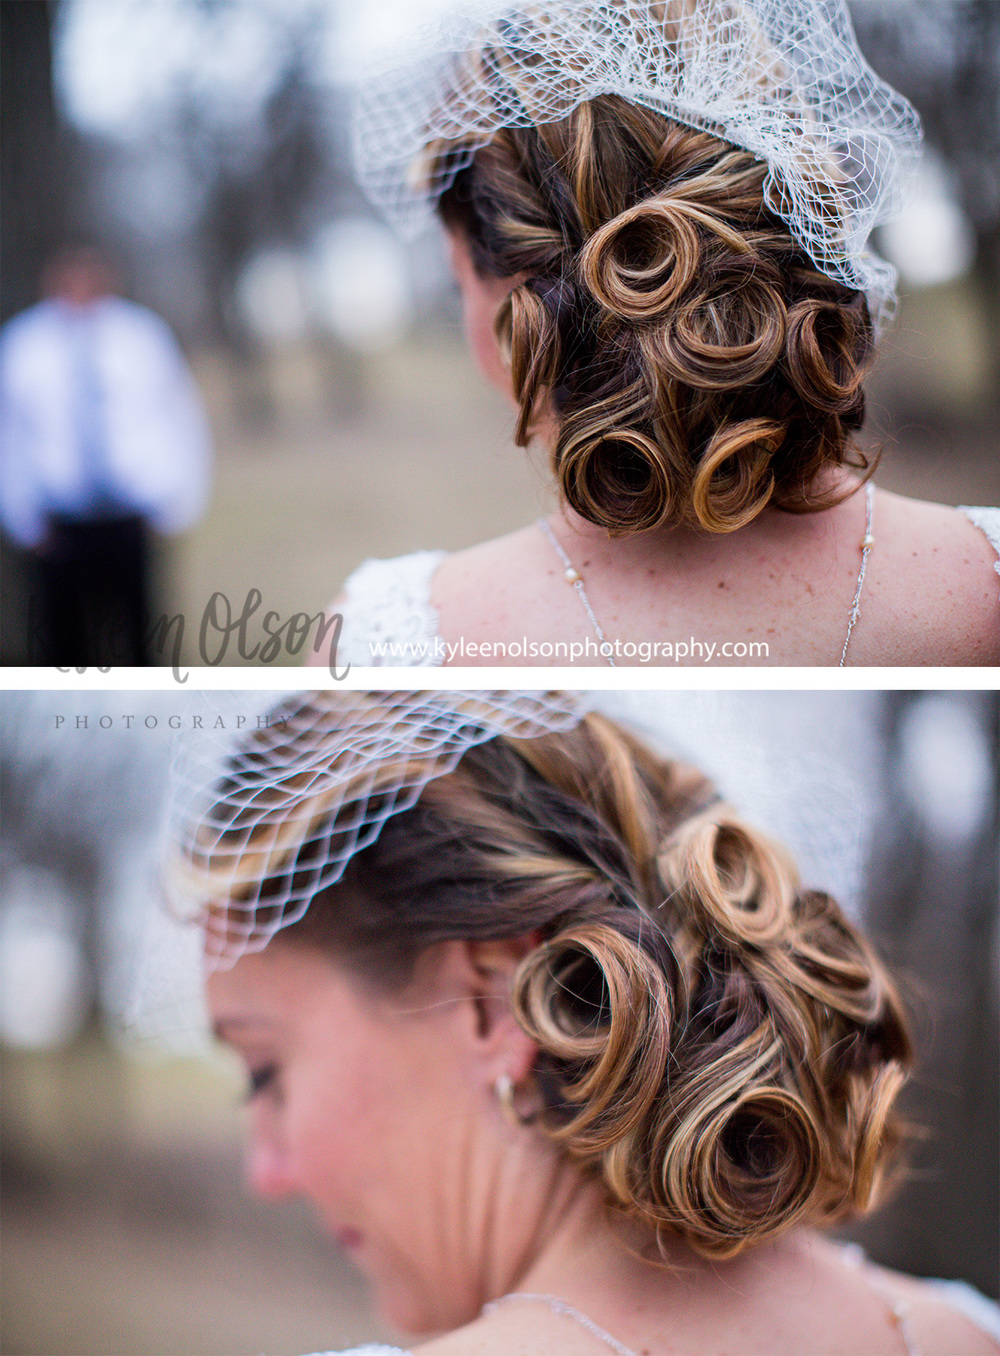 Her hair was perfect. Though we had originally wanted a loose down look, the wind was nuts so this was what we decided. So glad we did! 